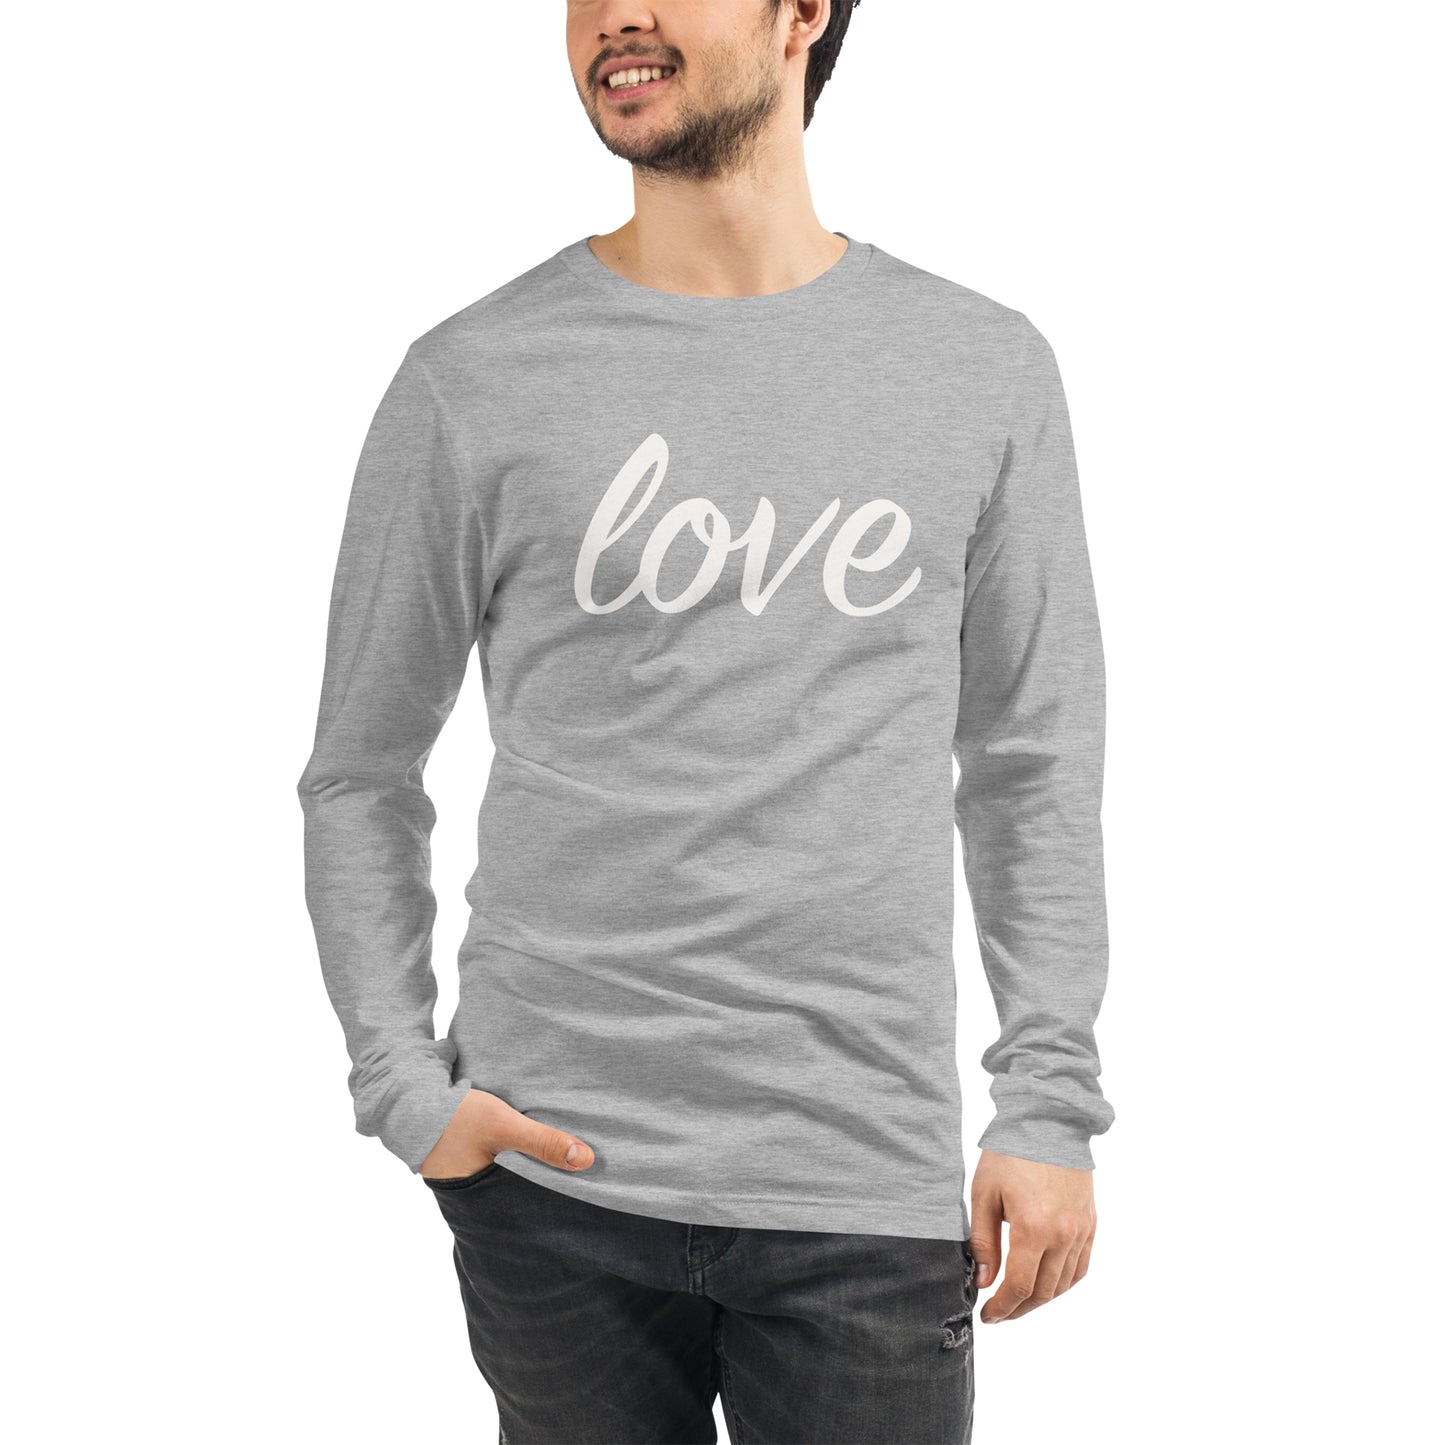 Love, the universal language, reminds us in these comfy, crew neck, long sleeve tees. Unisex fit with 'Love' hand printed on the front in white. We could all use a little more Love. 50/50 cotton/poly blend Machine washable, cold Made in California